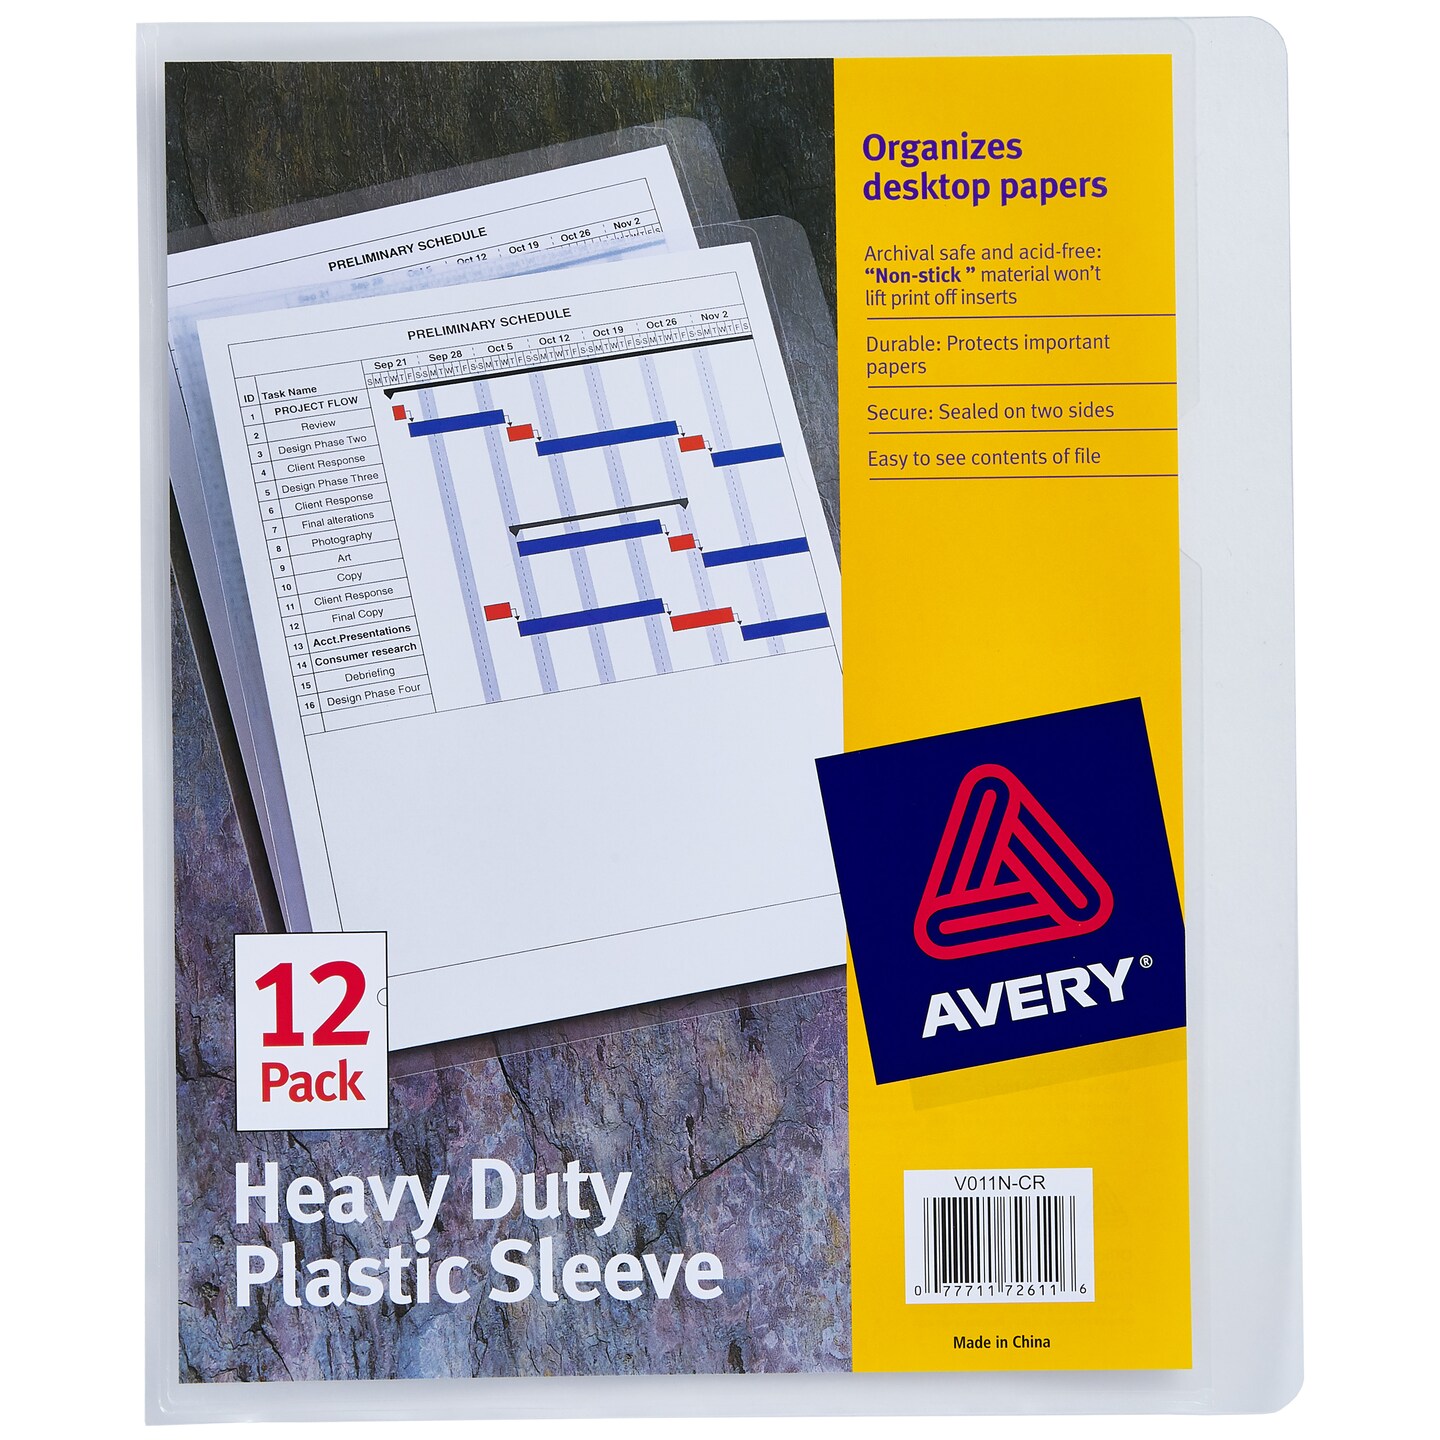 Avery Heavy Duty Plastic Document Sleeves, Holds up to 25 Sheets, 12 Clear Sleeves (72611)